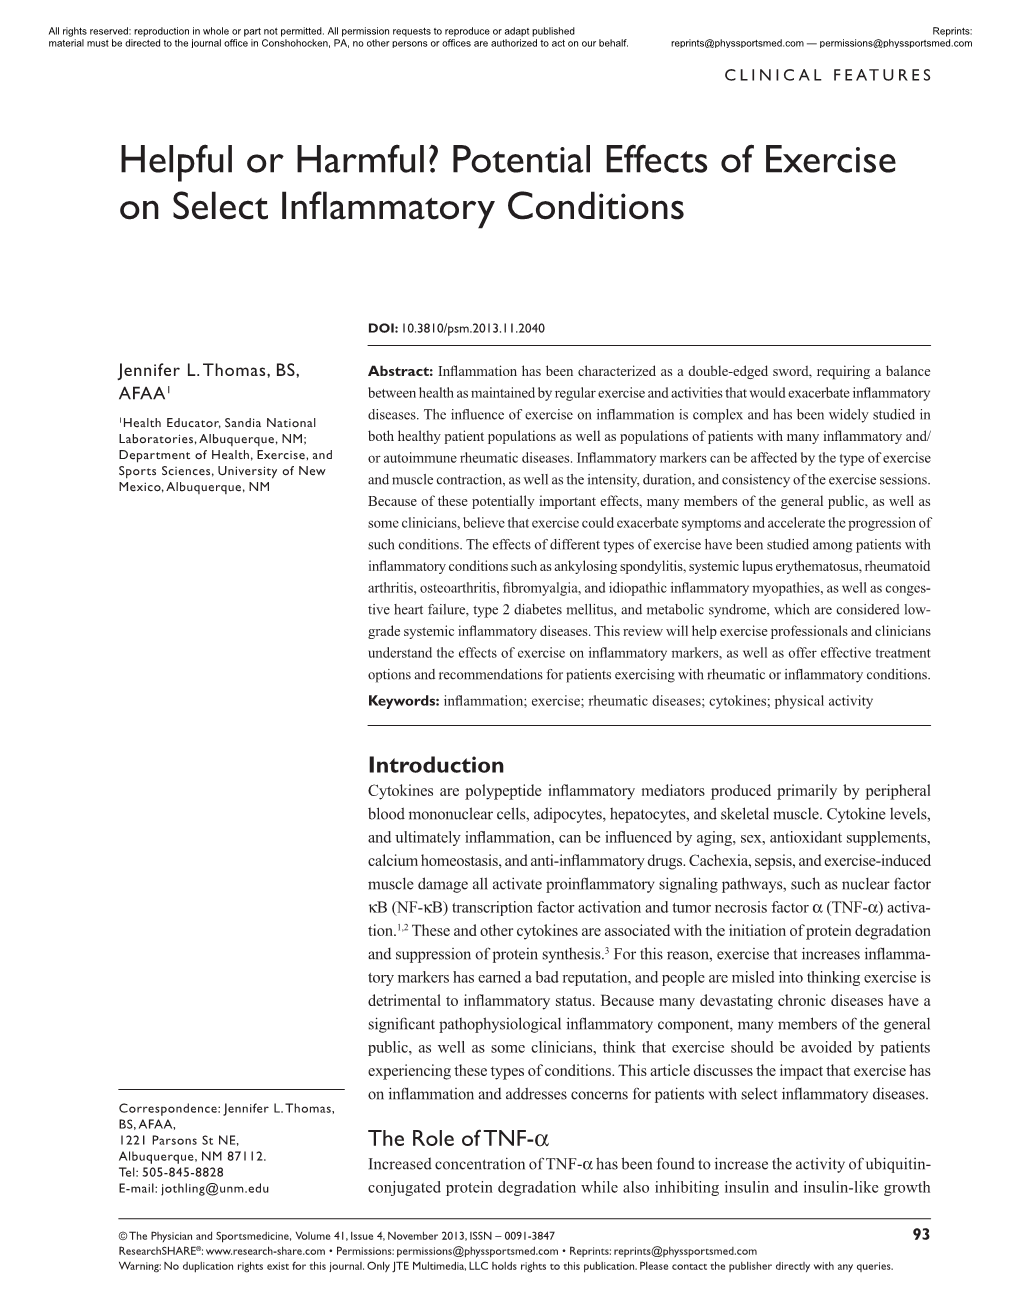 Potential Effects of Exercise on Select Inflammatory Conditions